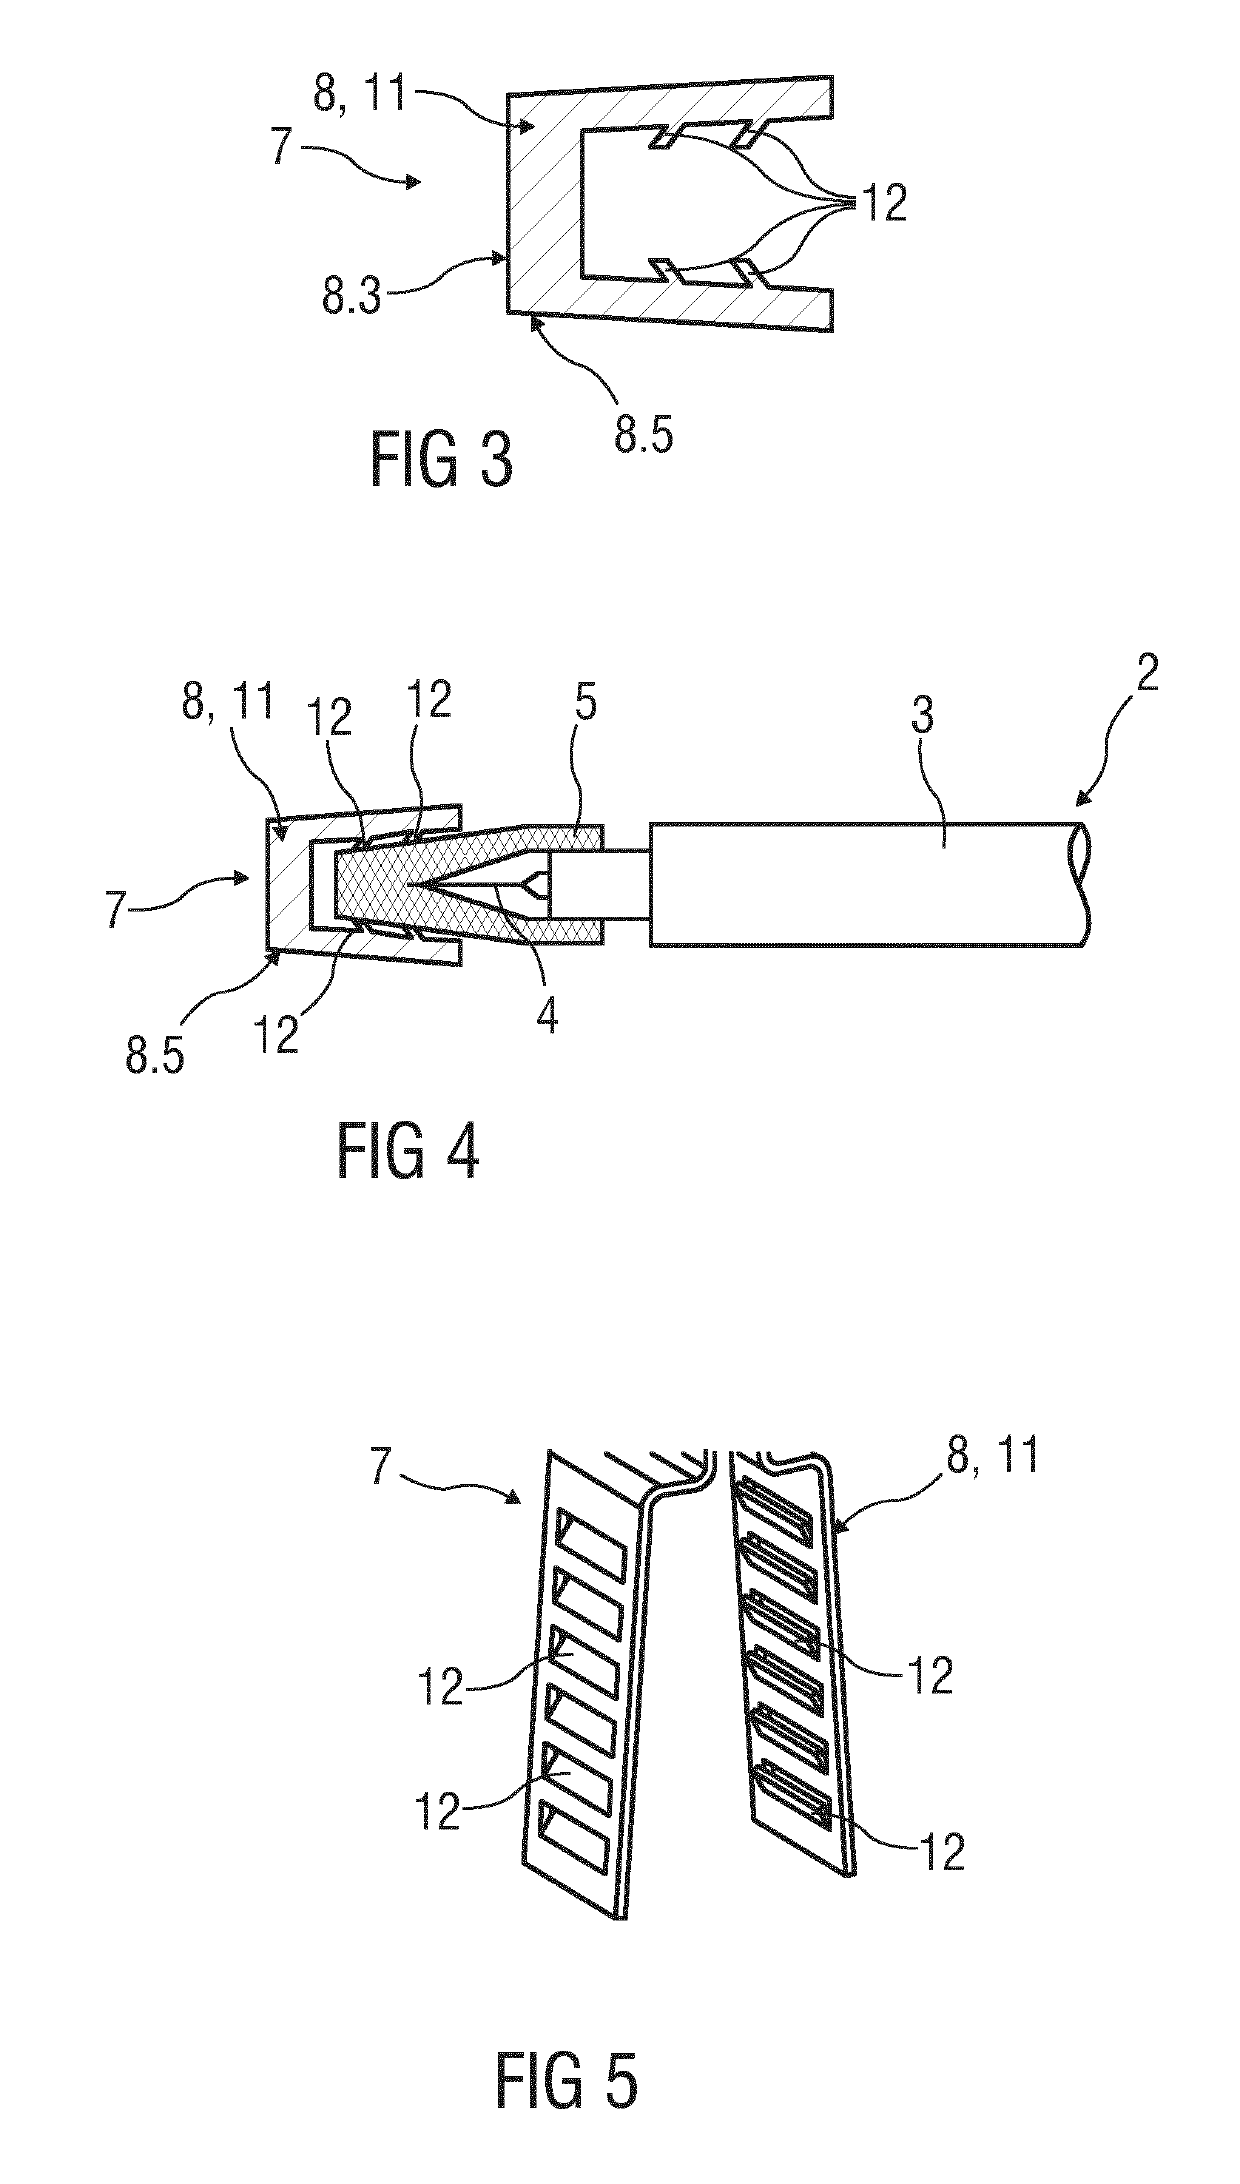 Needle cap remover and drug delivery device